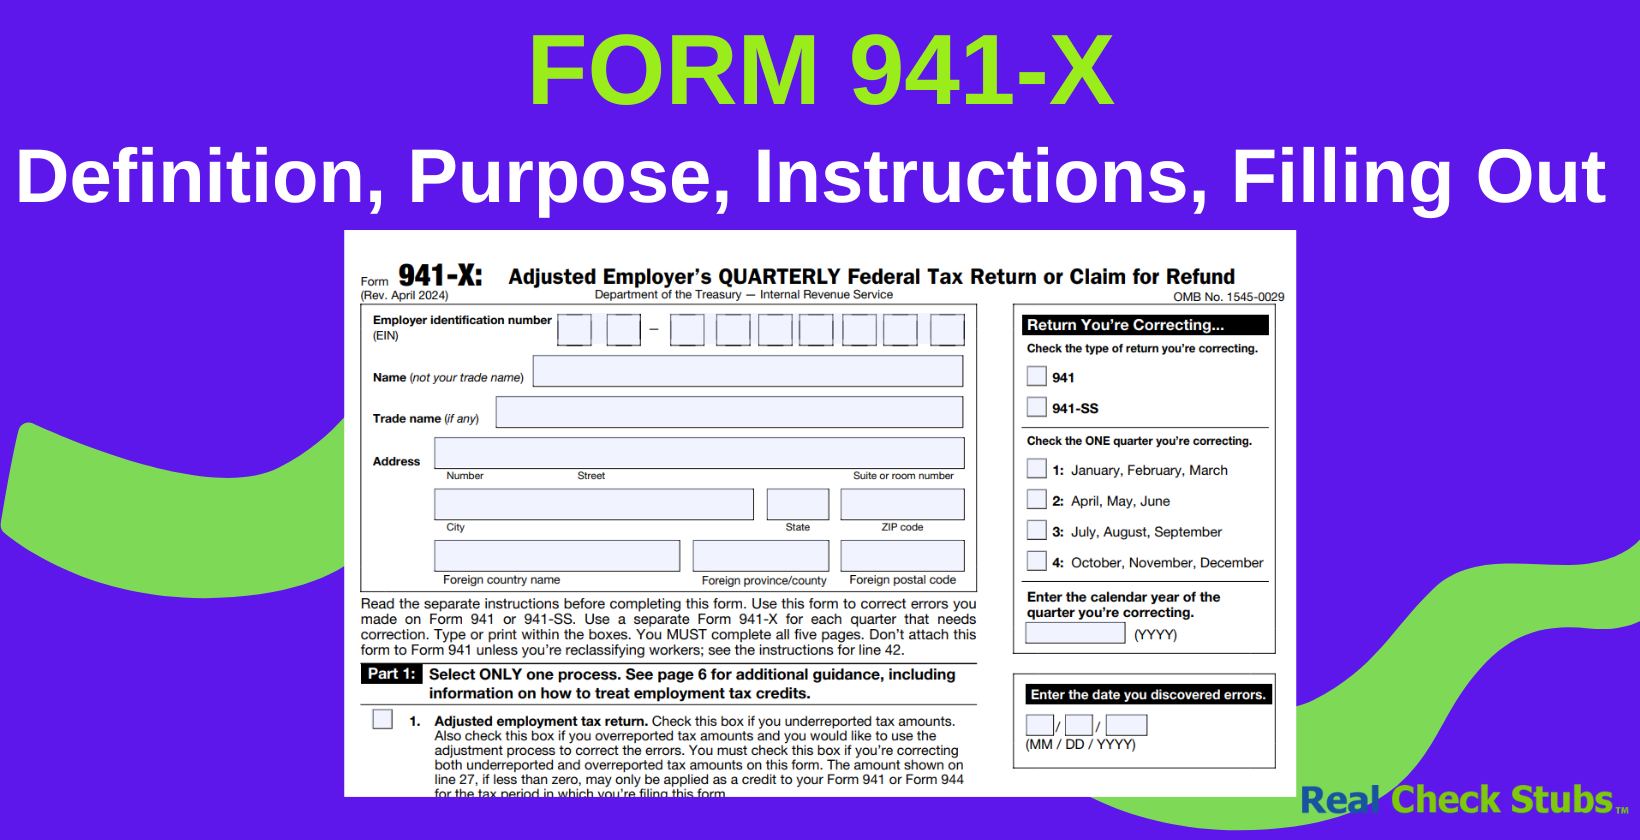 Understanding the Definition, Purpose, Instructions, Filling Out of Form 941-X 